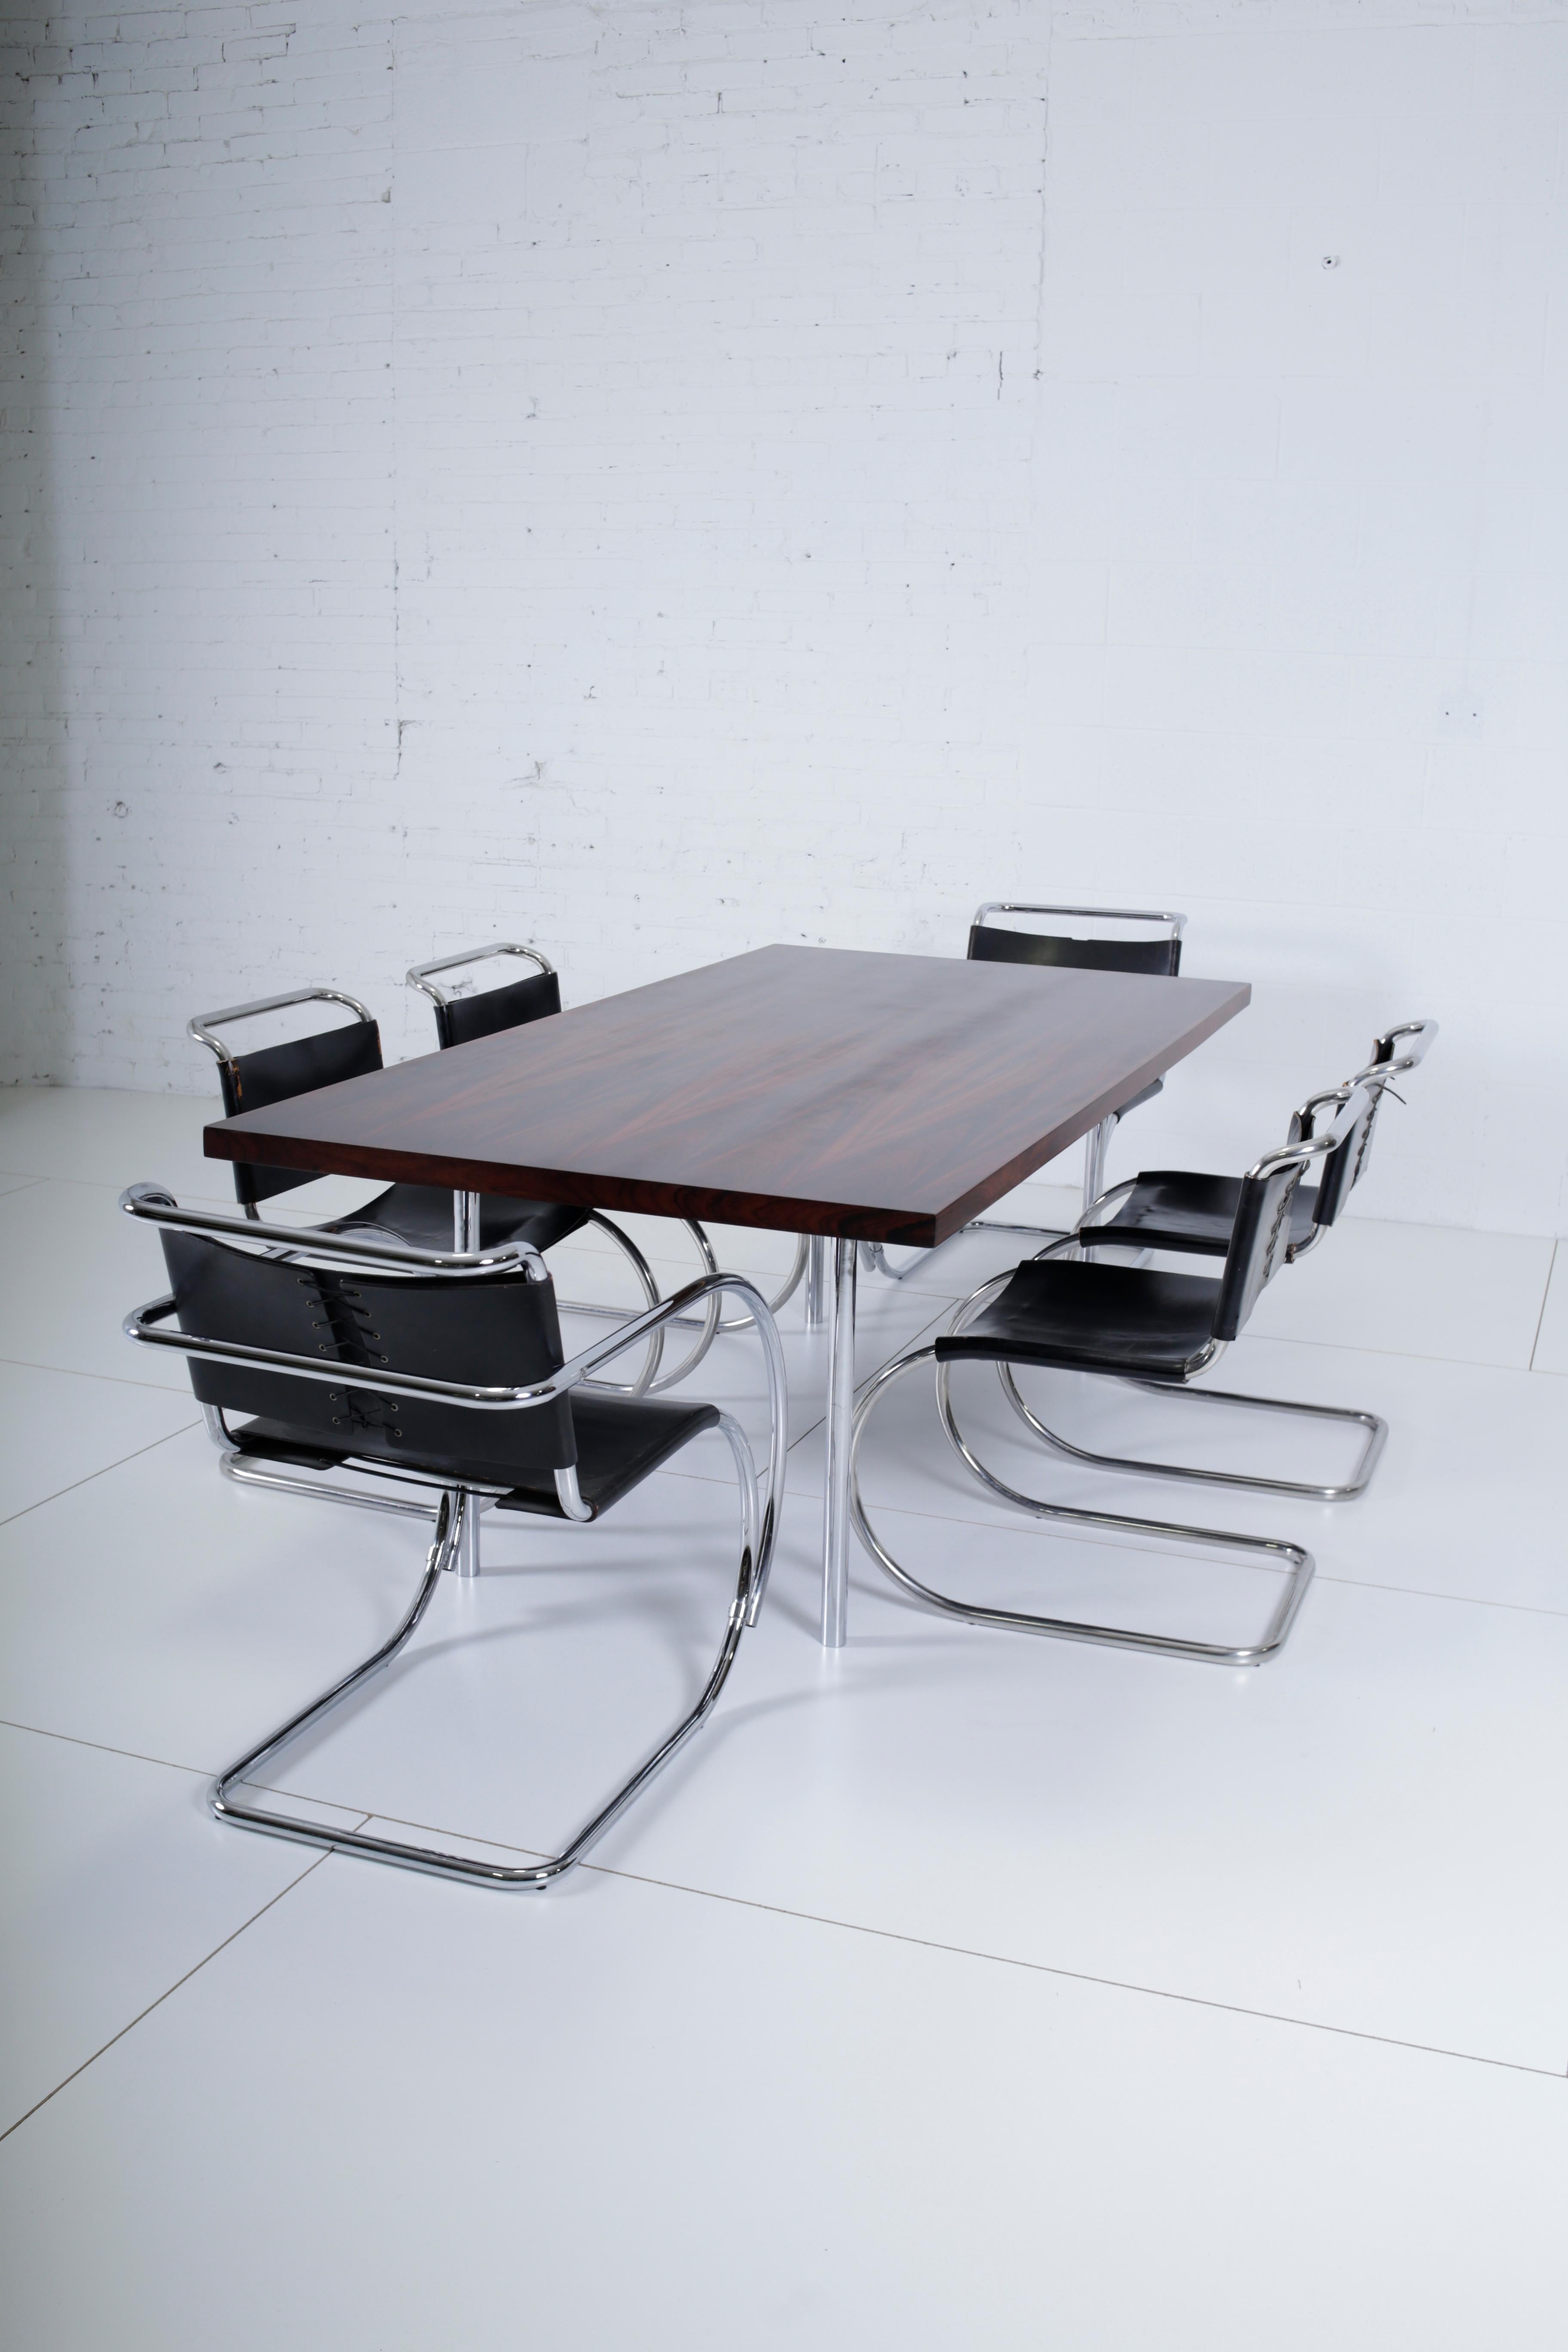 Complete Mies van der Rohe dining set, consisting of table and 6 chairs. Beautiful rosewood dining table with solid stainless steel legs, circa 1960s. Fully restored and refinished. Mies had this same table in his own home, which I have included in